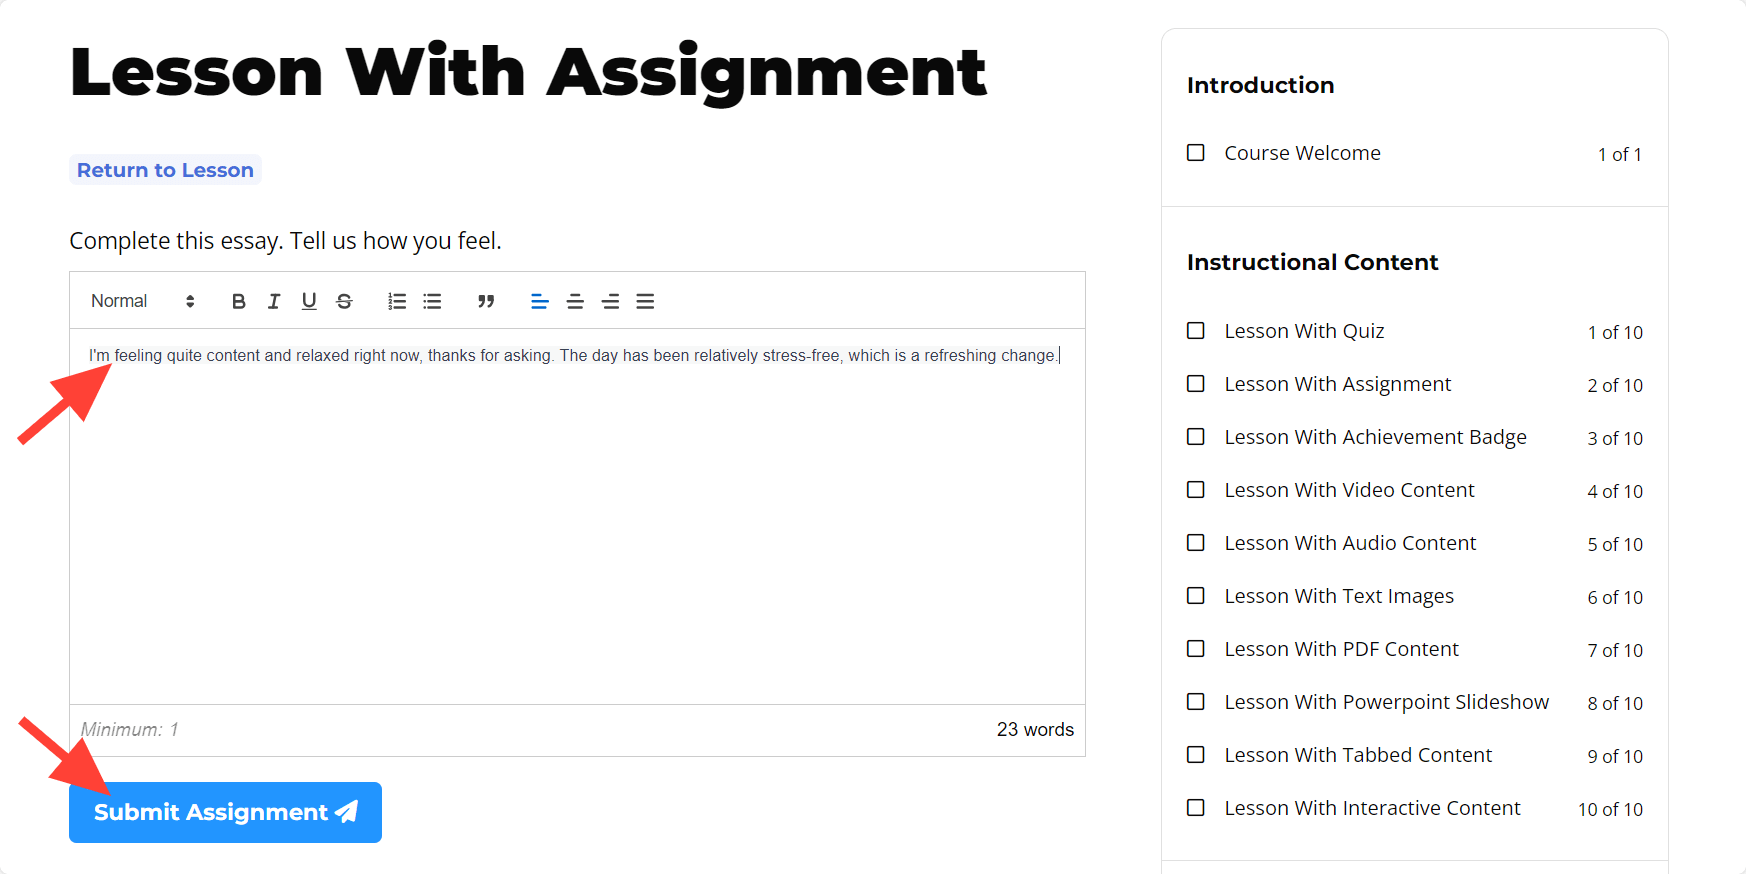 LifterLMS Assignment
